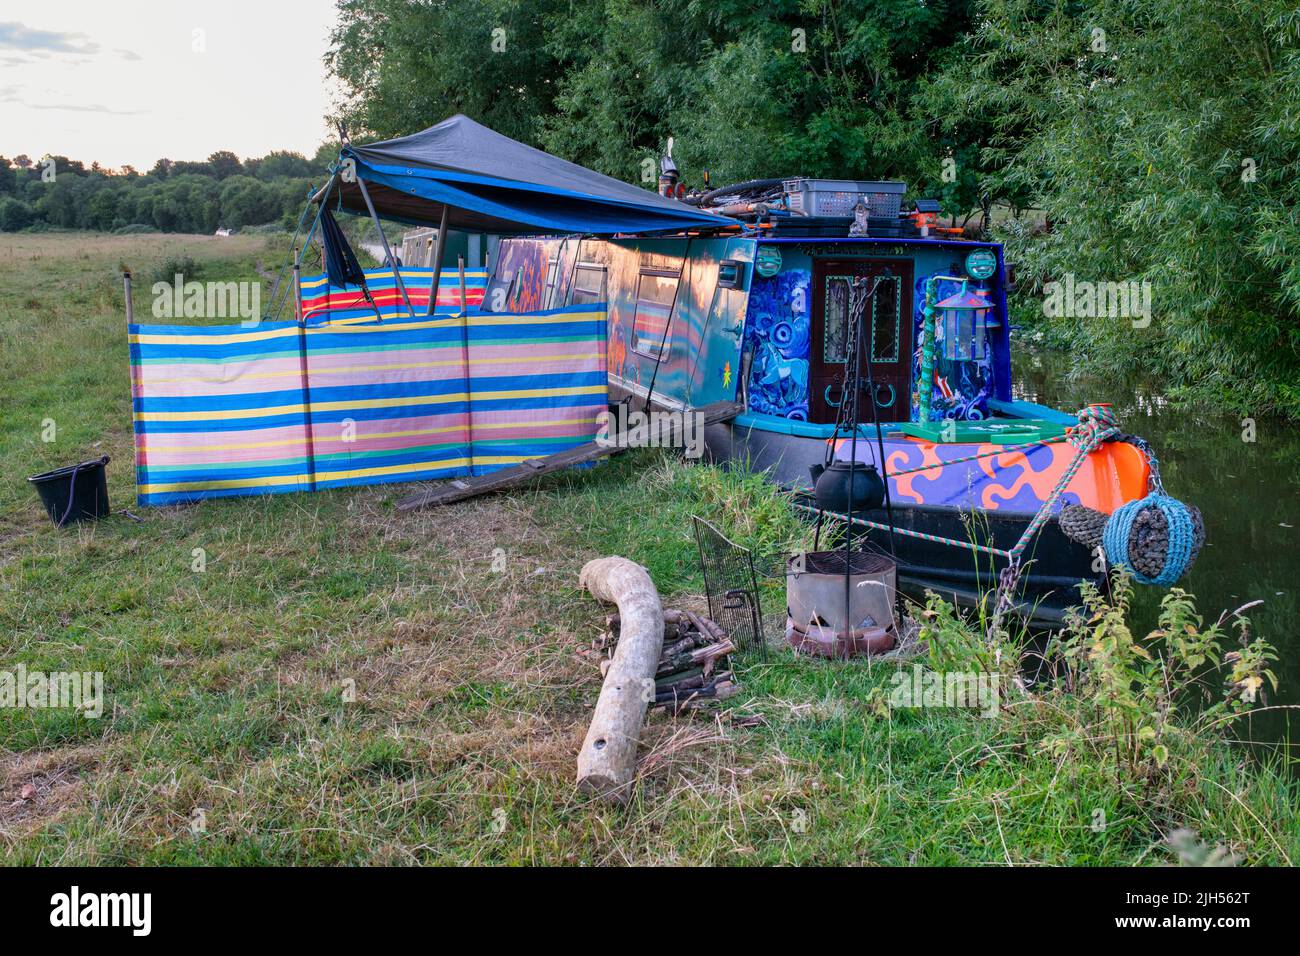 Canal boat on the oxford canal on an early morning in summer. Near Somerton, Oxfordshire, England Stock Photo